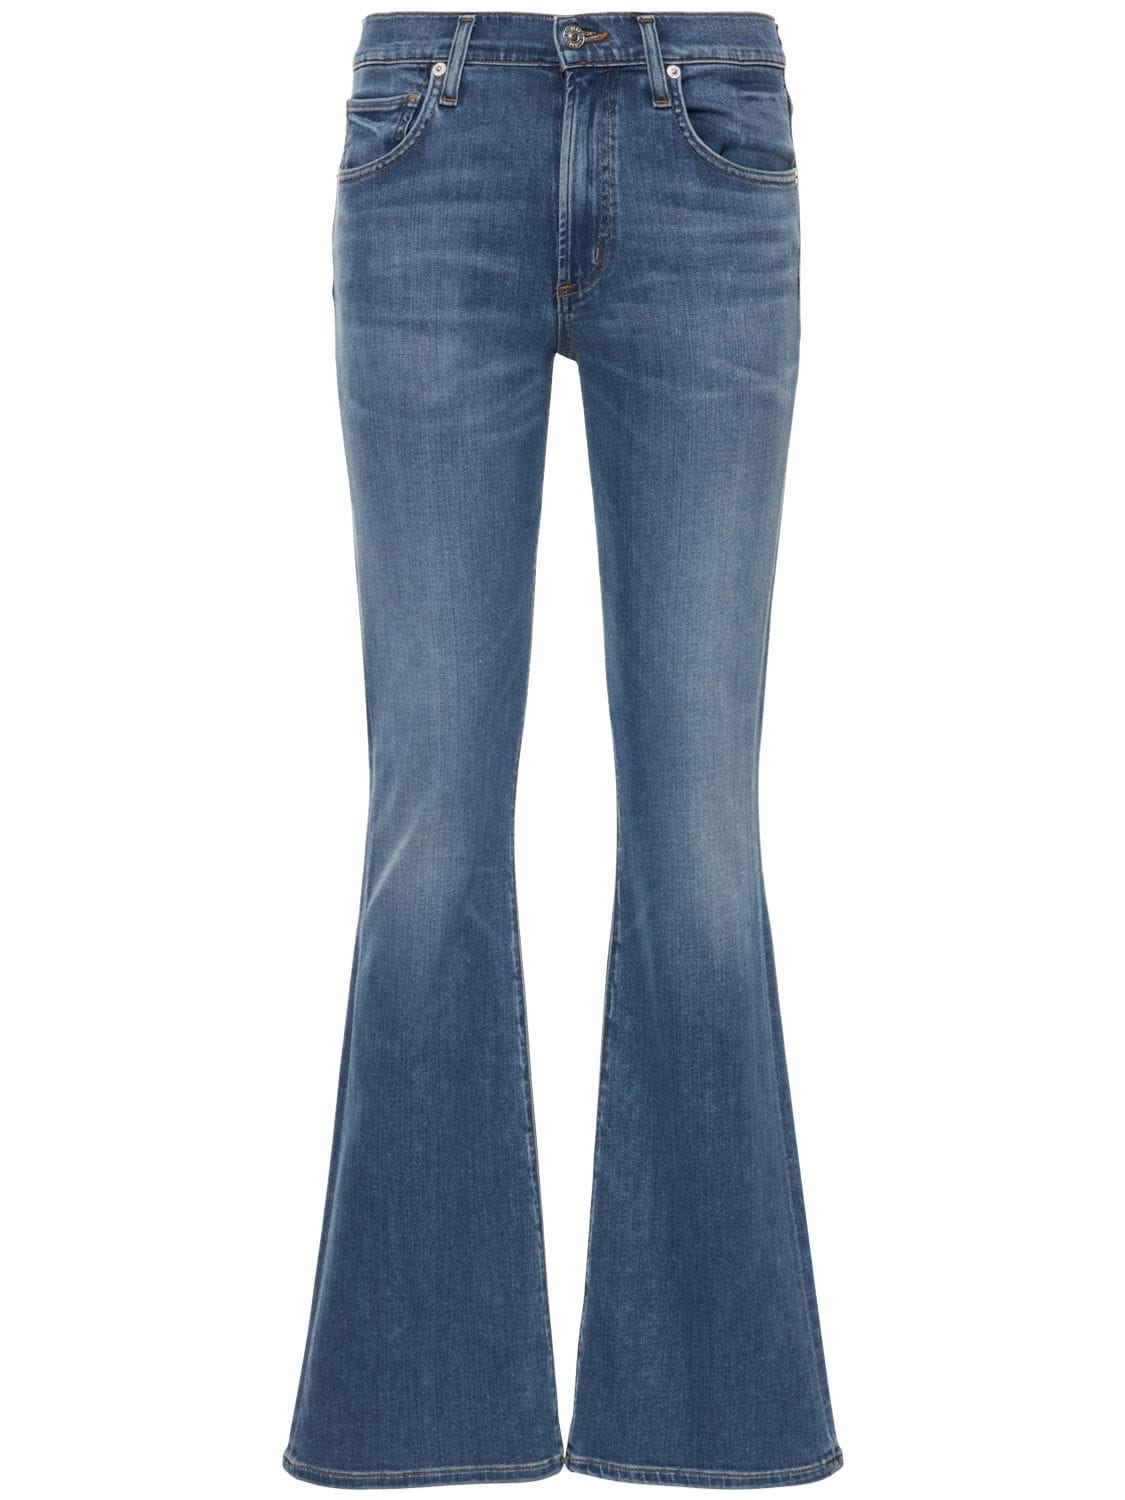 Emannuelle Low Rise Rayon Blend Jeans - CITIZENS OF HUMANITY - Modalova